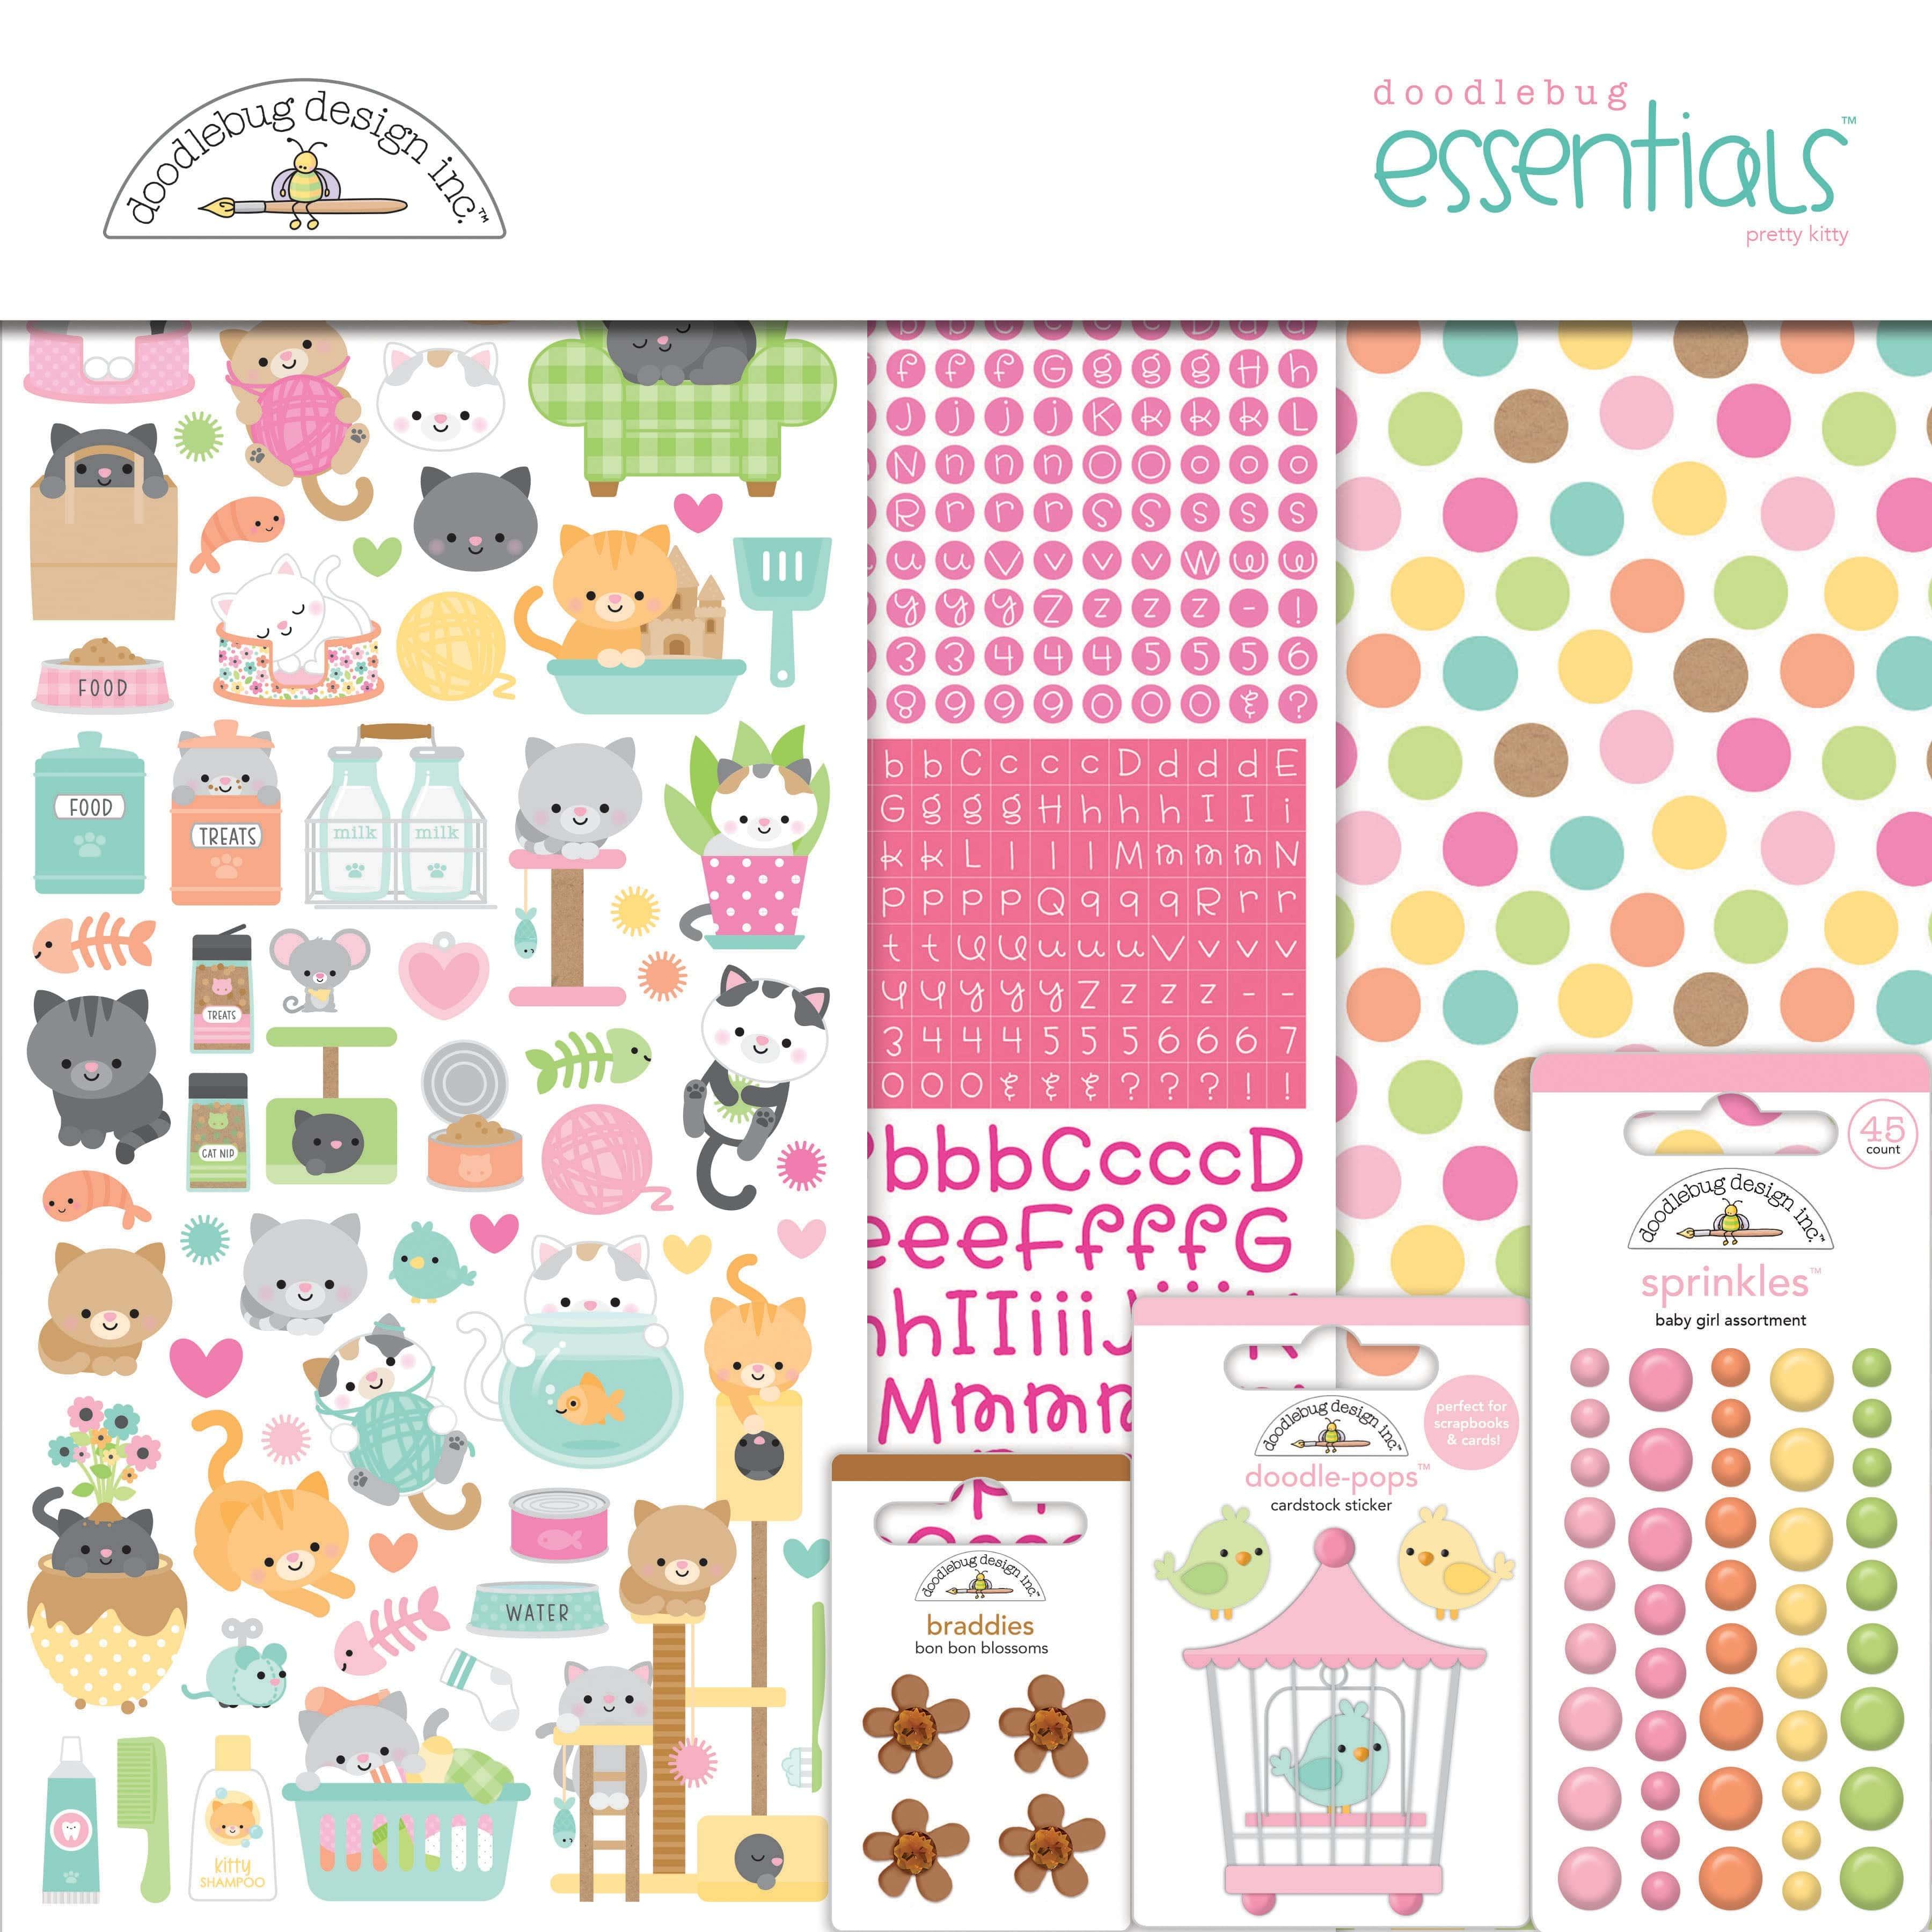 Pretty Kitty Collection Essentials 12 x 12 Scrapbook Paper, Sticker & Embellishment Kit by Doodlebug Design - Scrapbook Supply Companies